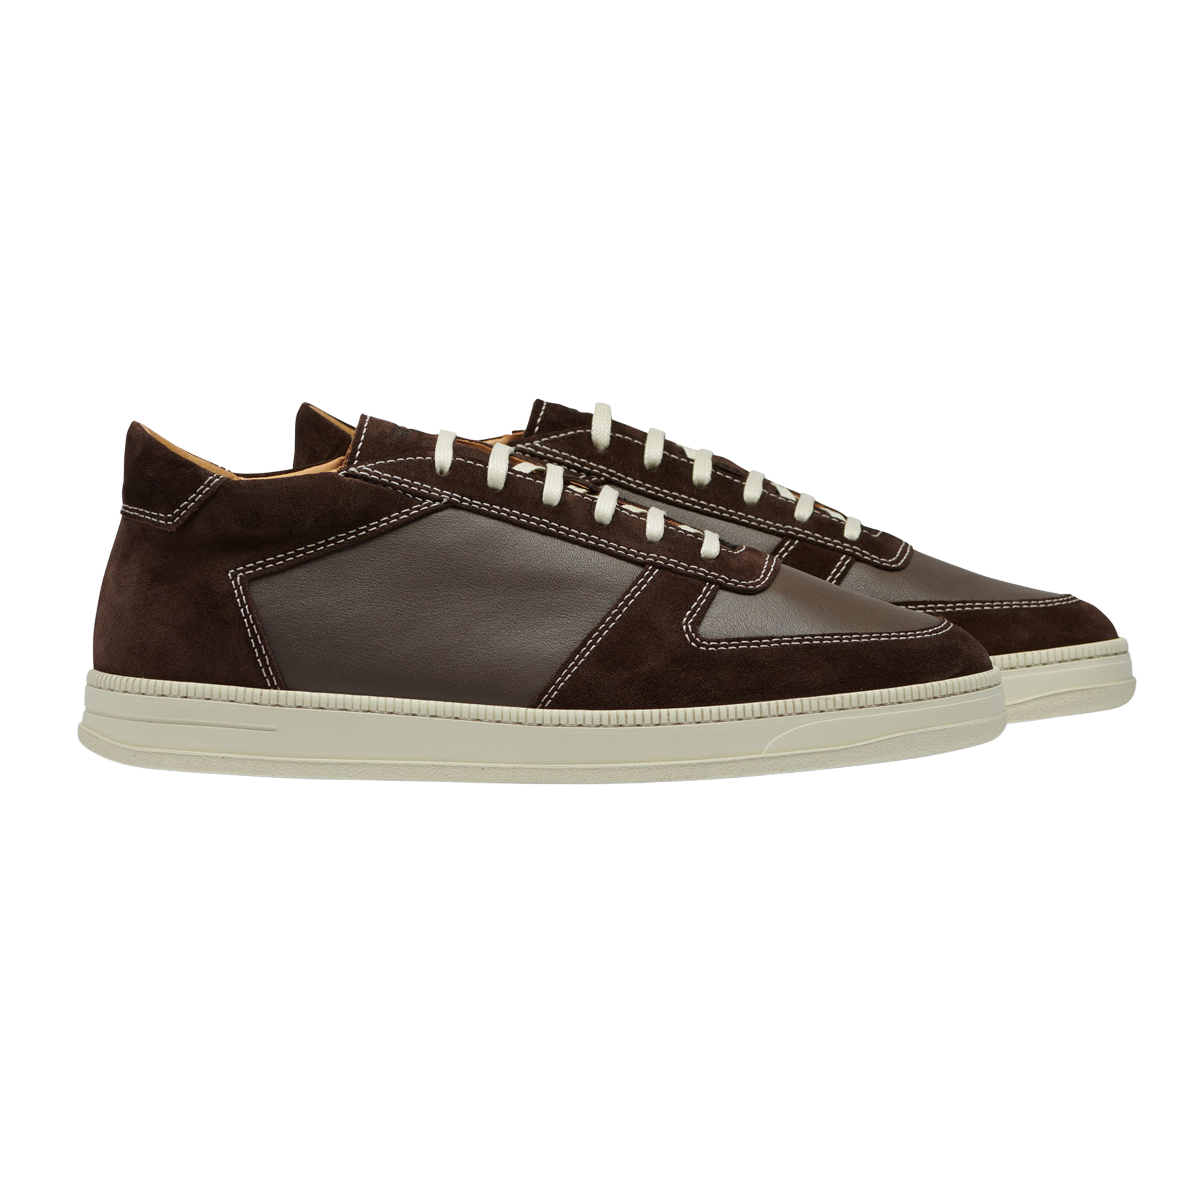 C.QP - Chocolate Brown Suede Leather Cingo Sneakers | Baltzar